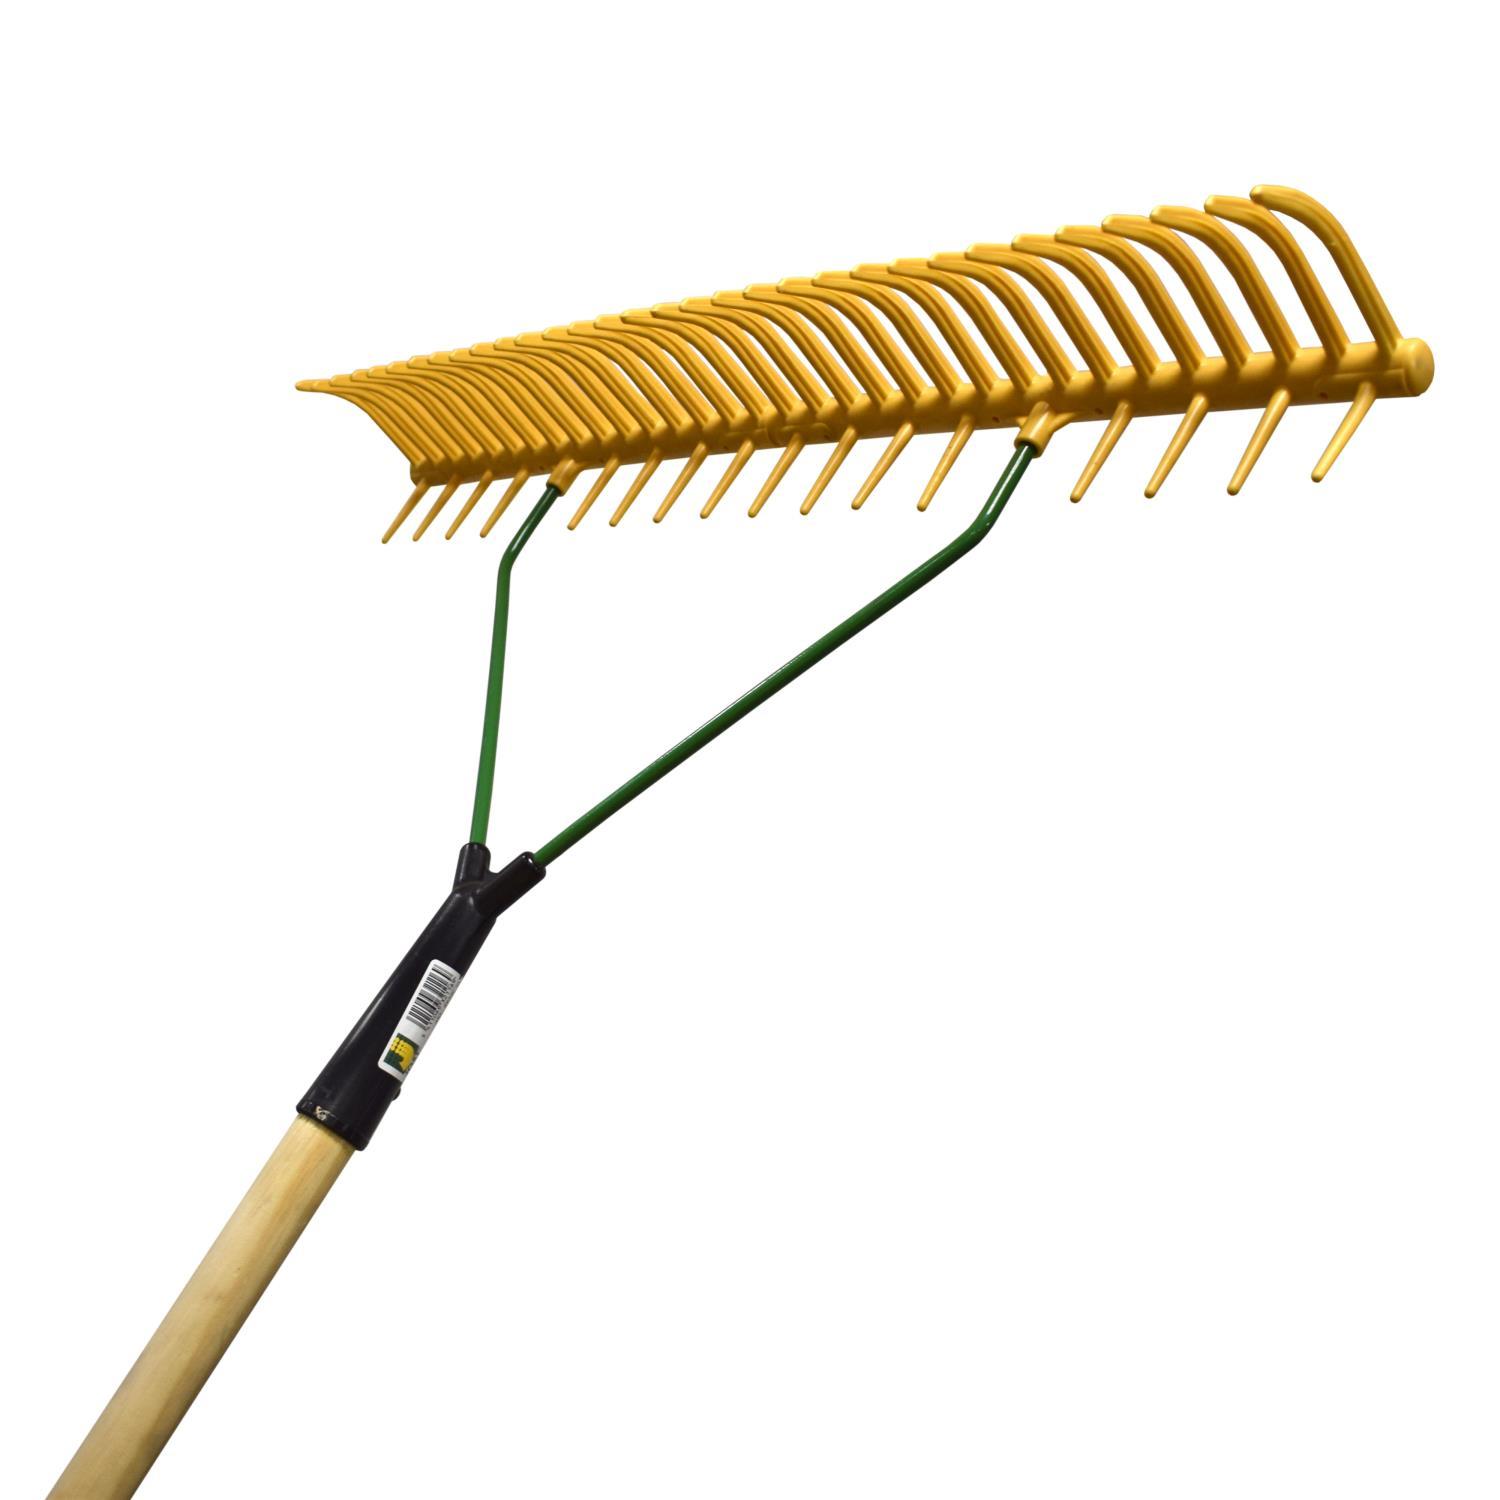 Buy 32 Tine Plastic Hay Rake from Fane Valley Stores Agricultural Supplies